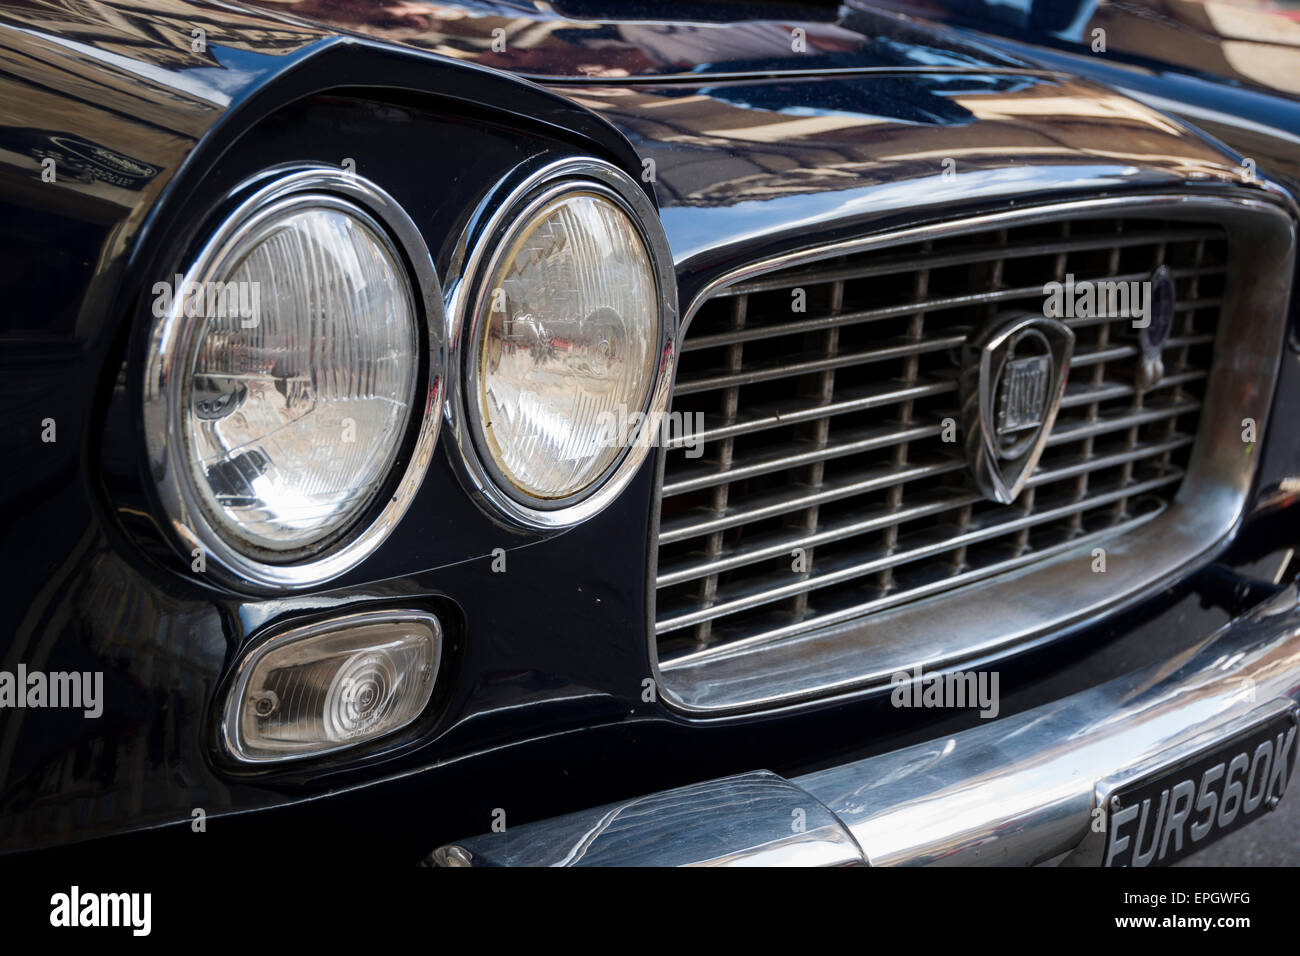 Old Lancia High Resolution Stock Photography and Images - Alamy